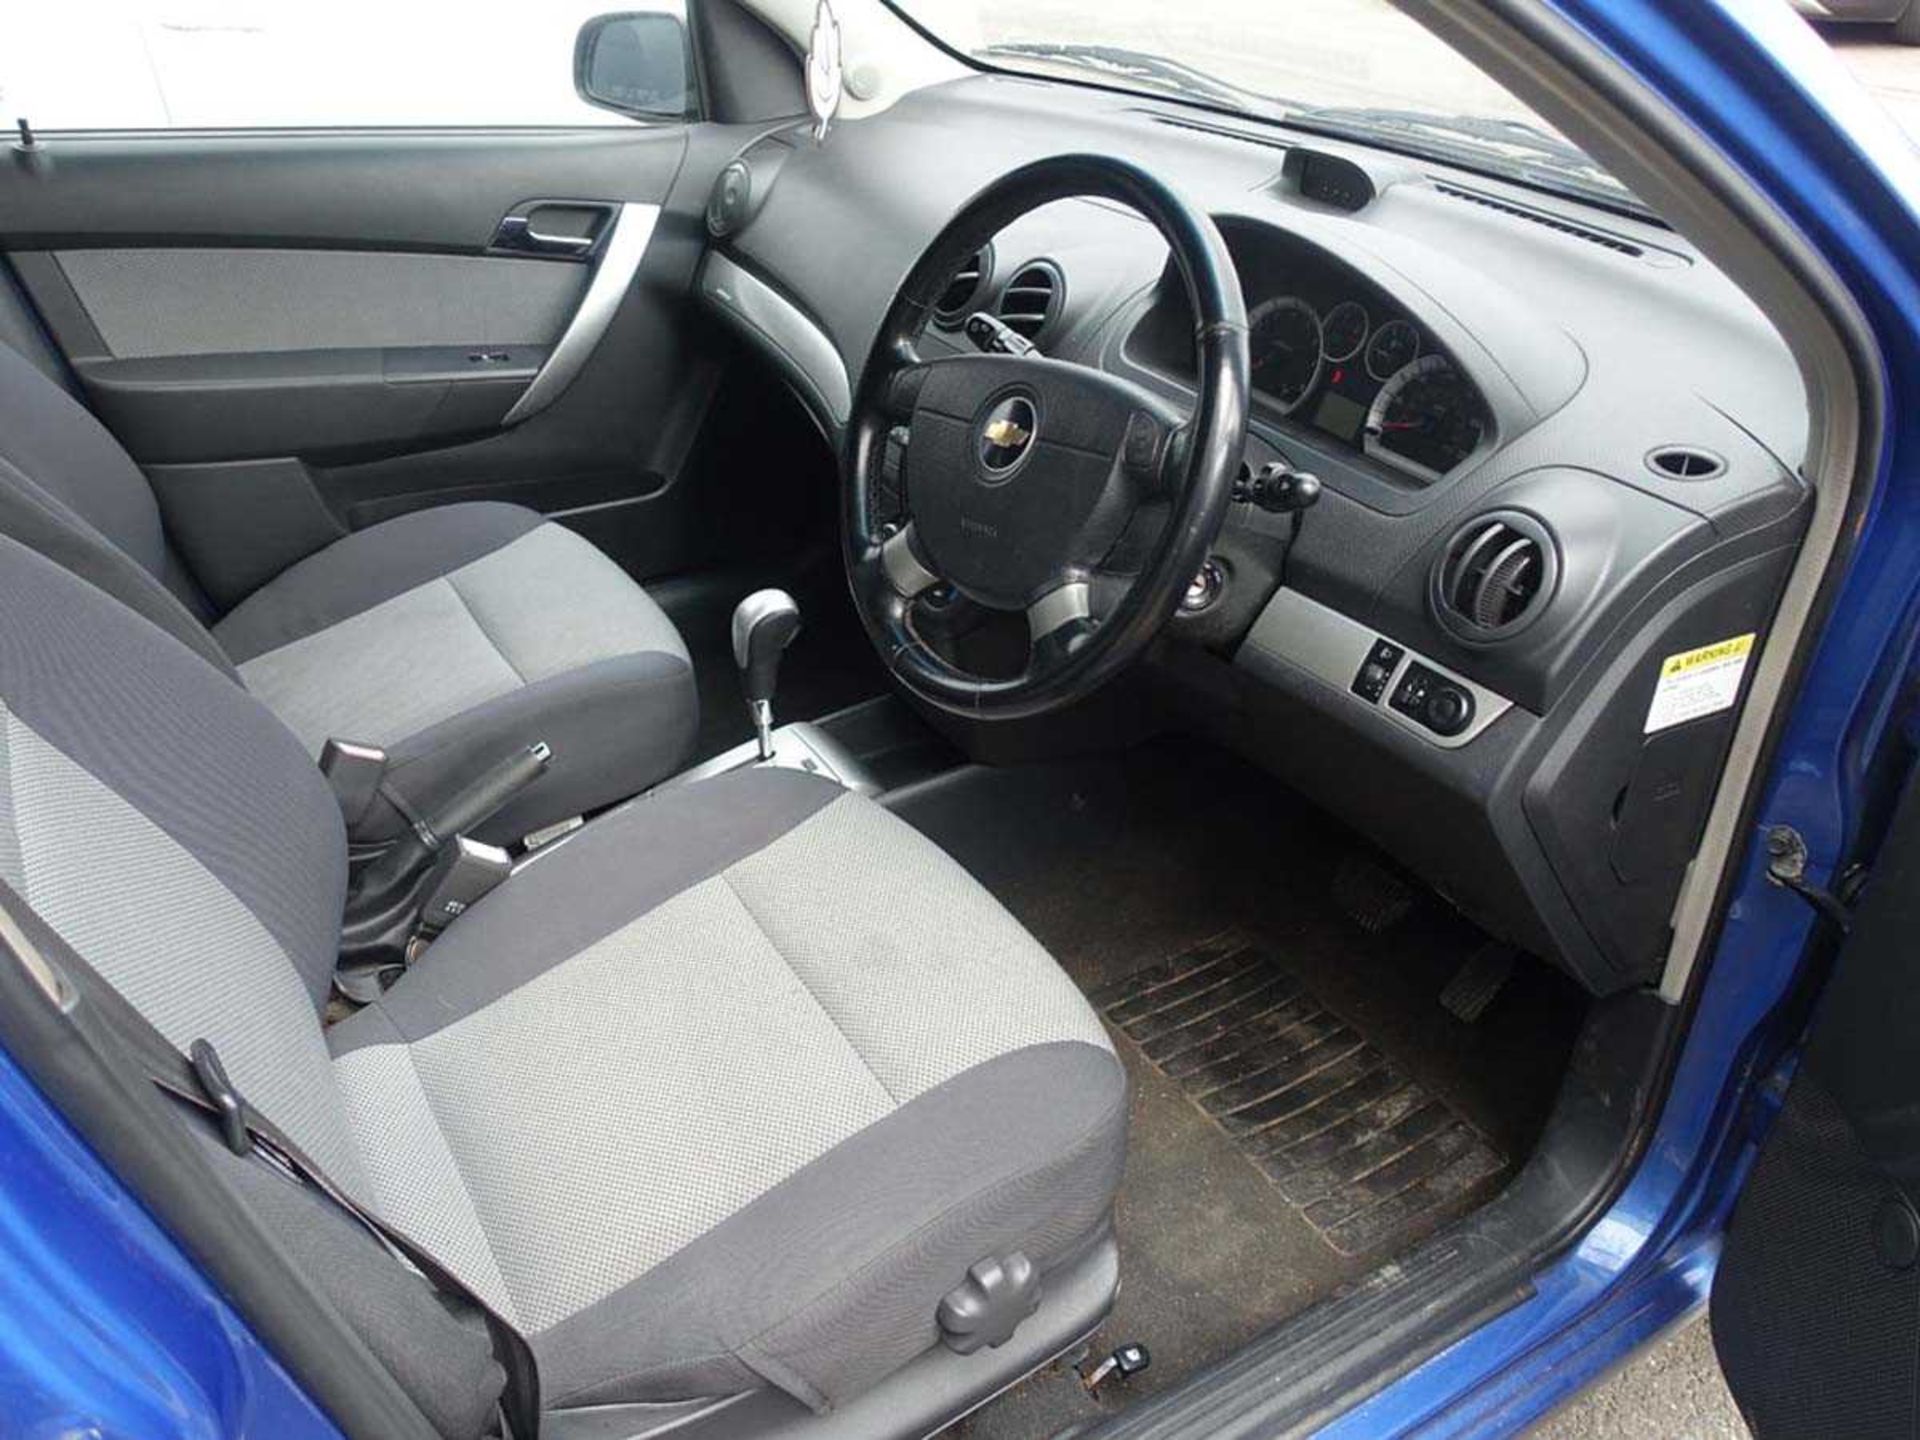 LR59 0PF (2009) Chevrolet Aveo LT Auto in blue, 5 door hatchback, petrol, 1399cc, V5 and two keys, 4 - Image 6 of 10